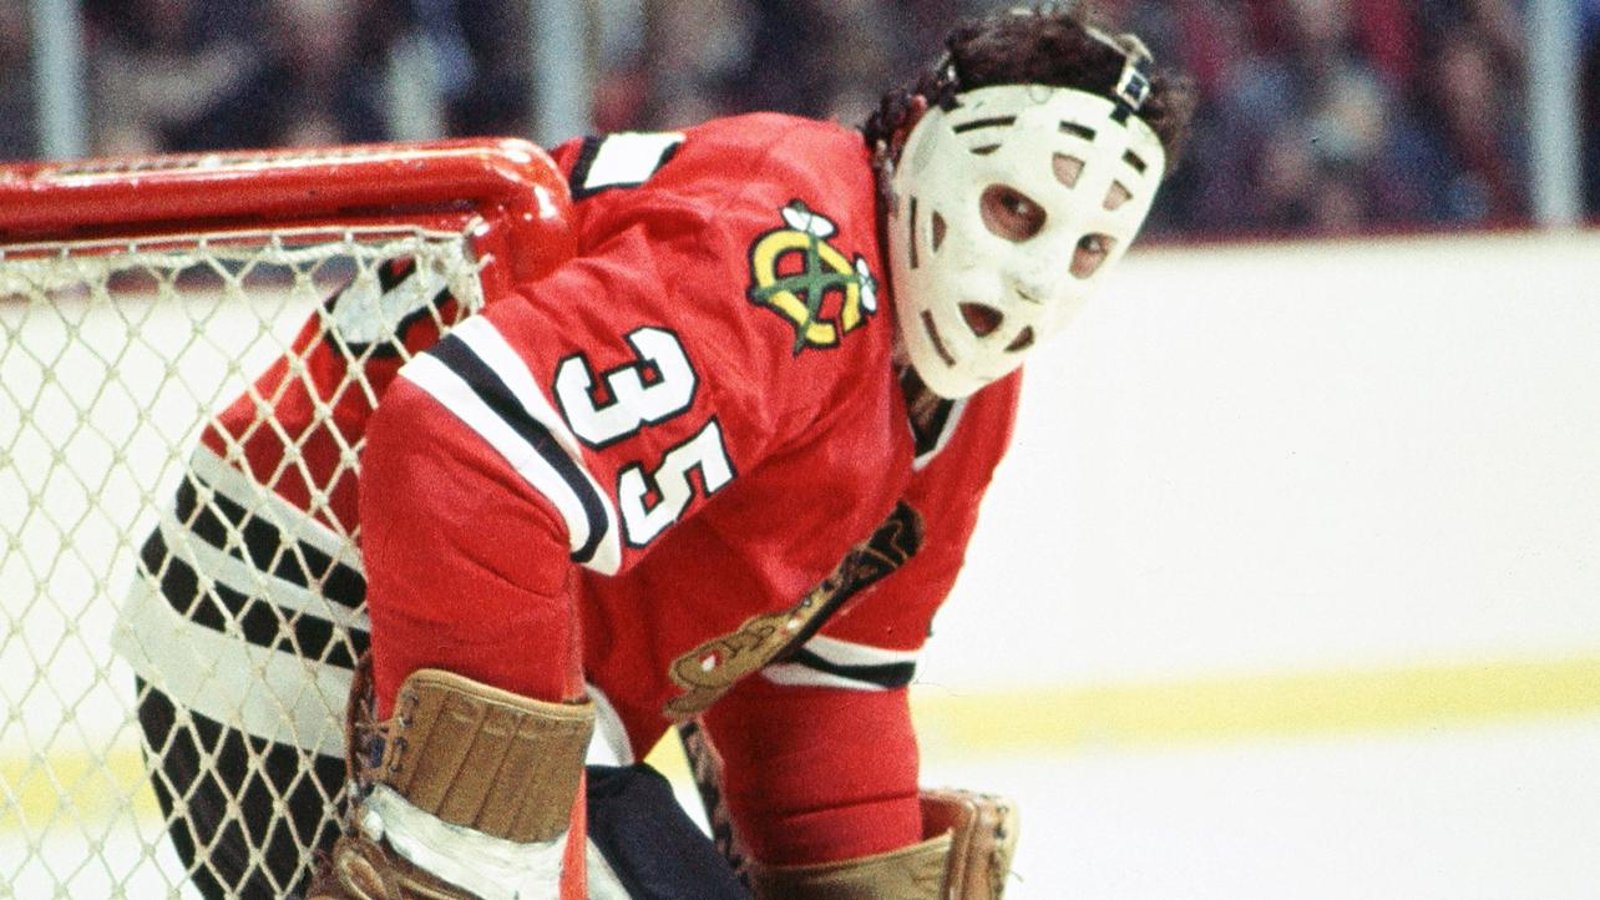 Tony Esposito dead – NHL legend dies after battle with pancreatic